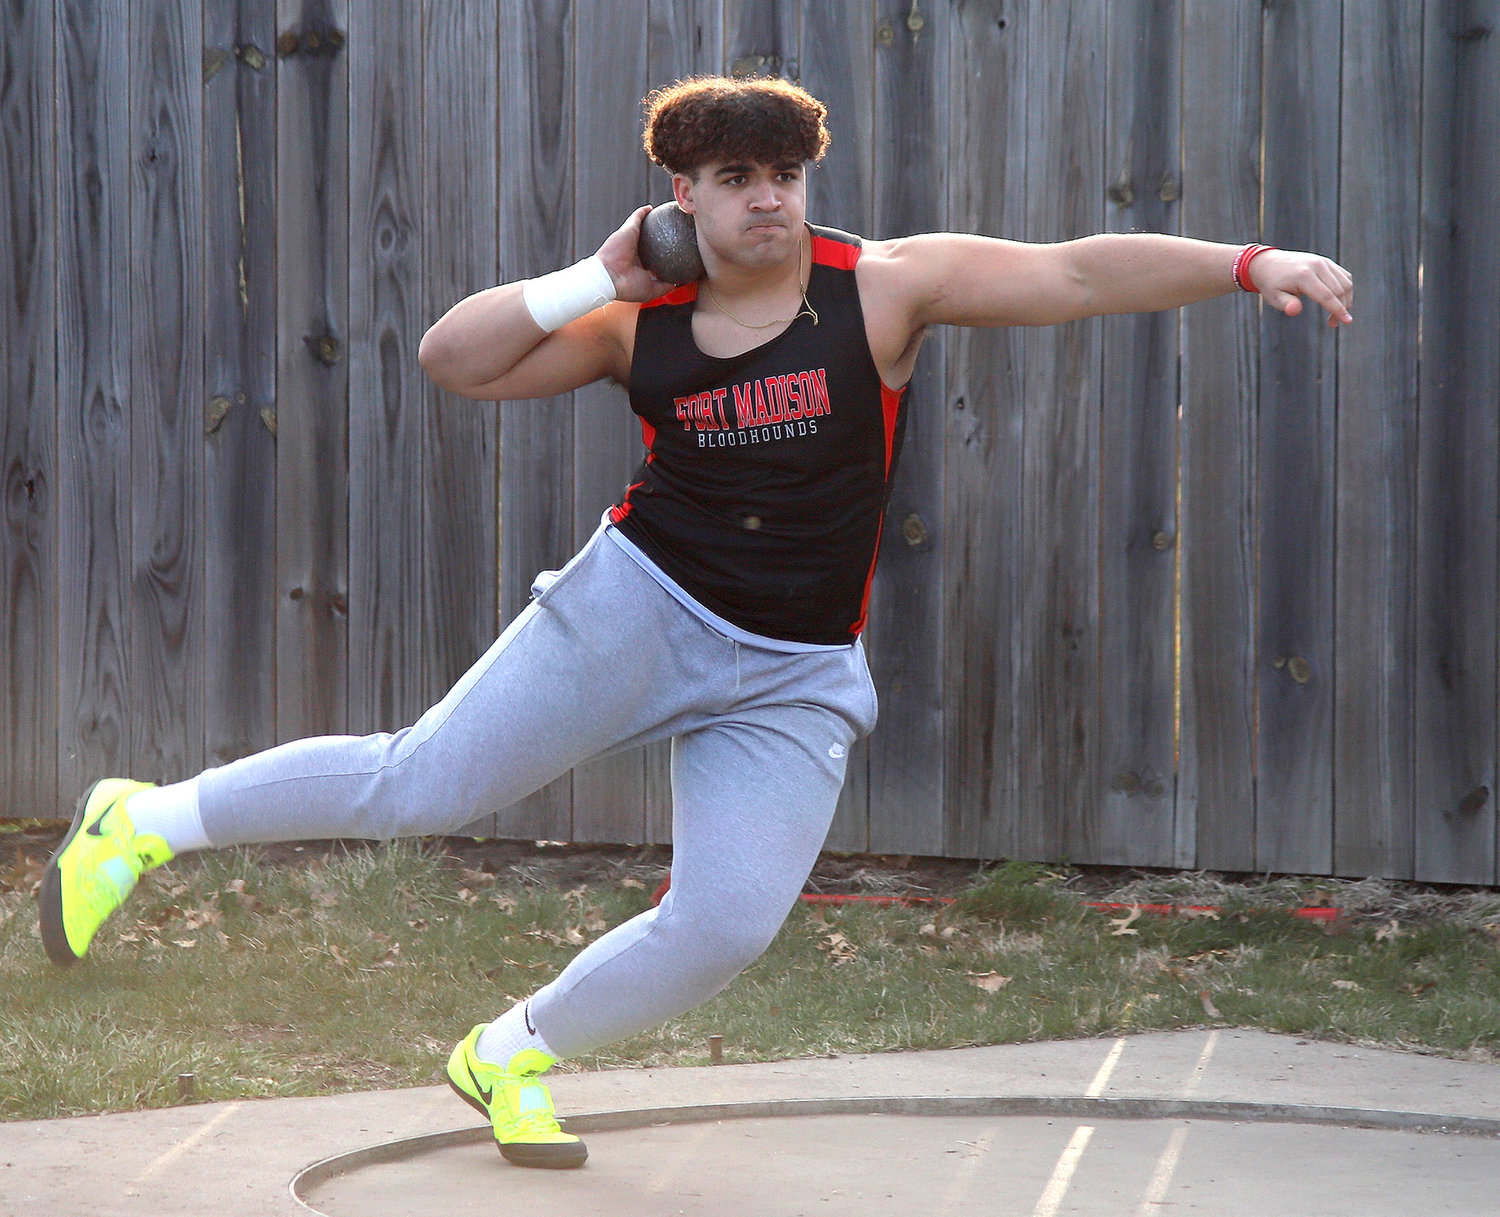 The Hounds' Caden Barnes winds up for a throw in the shot-put at Falcon Field Monday night. Barnes would earn 3rd in Class 3A.